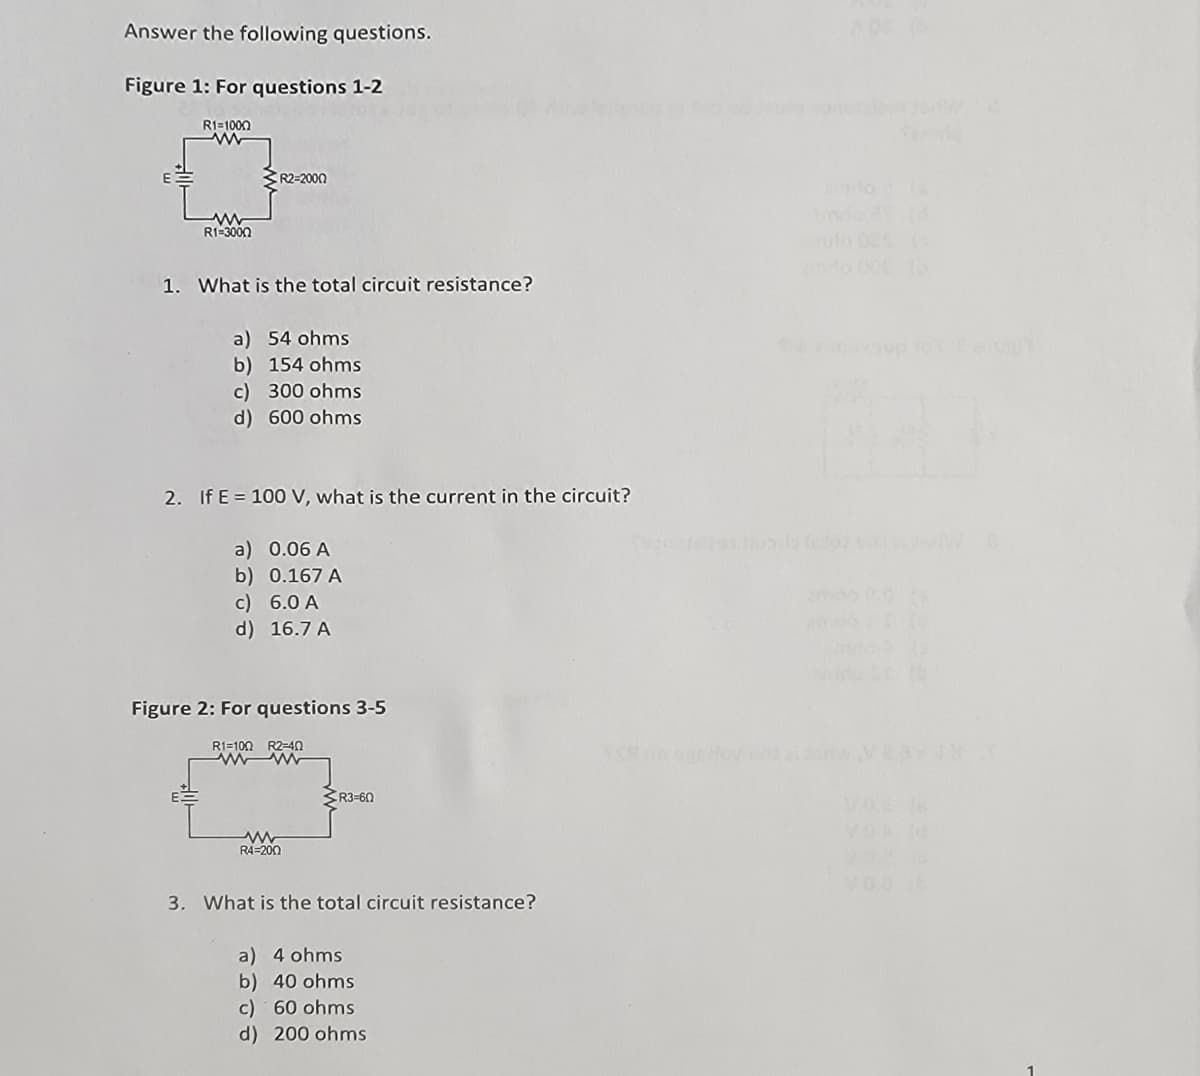 Answer the following questions.
Figure 1: For questions 1-2
R1=1000
ww
R1-3000
R2-2000
1. What is the total circuit resistance?
a) 54 ohms
b) 154 ohms
c) 300 ohms
d) 600 ohms
2. If E 100 V, what is the current in the circuit?
a) 0.06 A
b) 0.167 A
c) 6.0 A
d) 16.7 A
Figure 2: For questions 3-5
R1-100 R2-40
www
R4-200
R3-60
3. What is the total circuit resistance?
a) 4 ohms
b) 40 ohms
c) 60 ohms
d) 200 ohms
Or